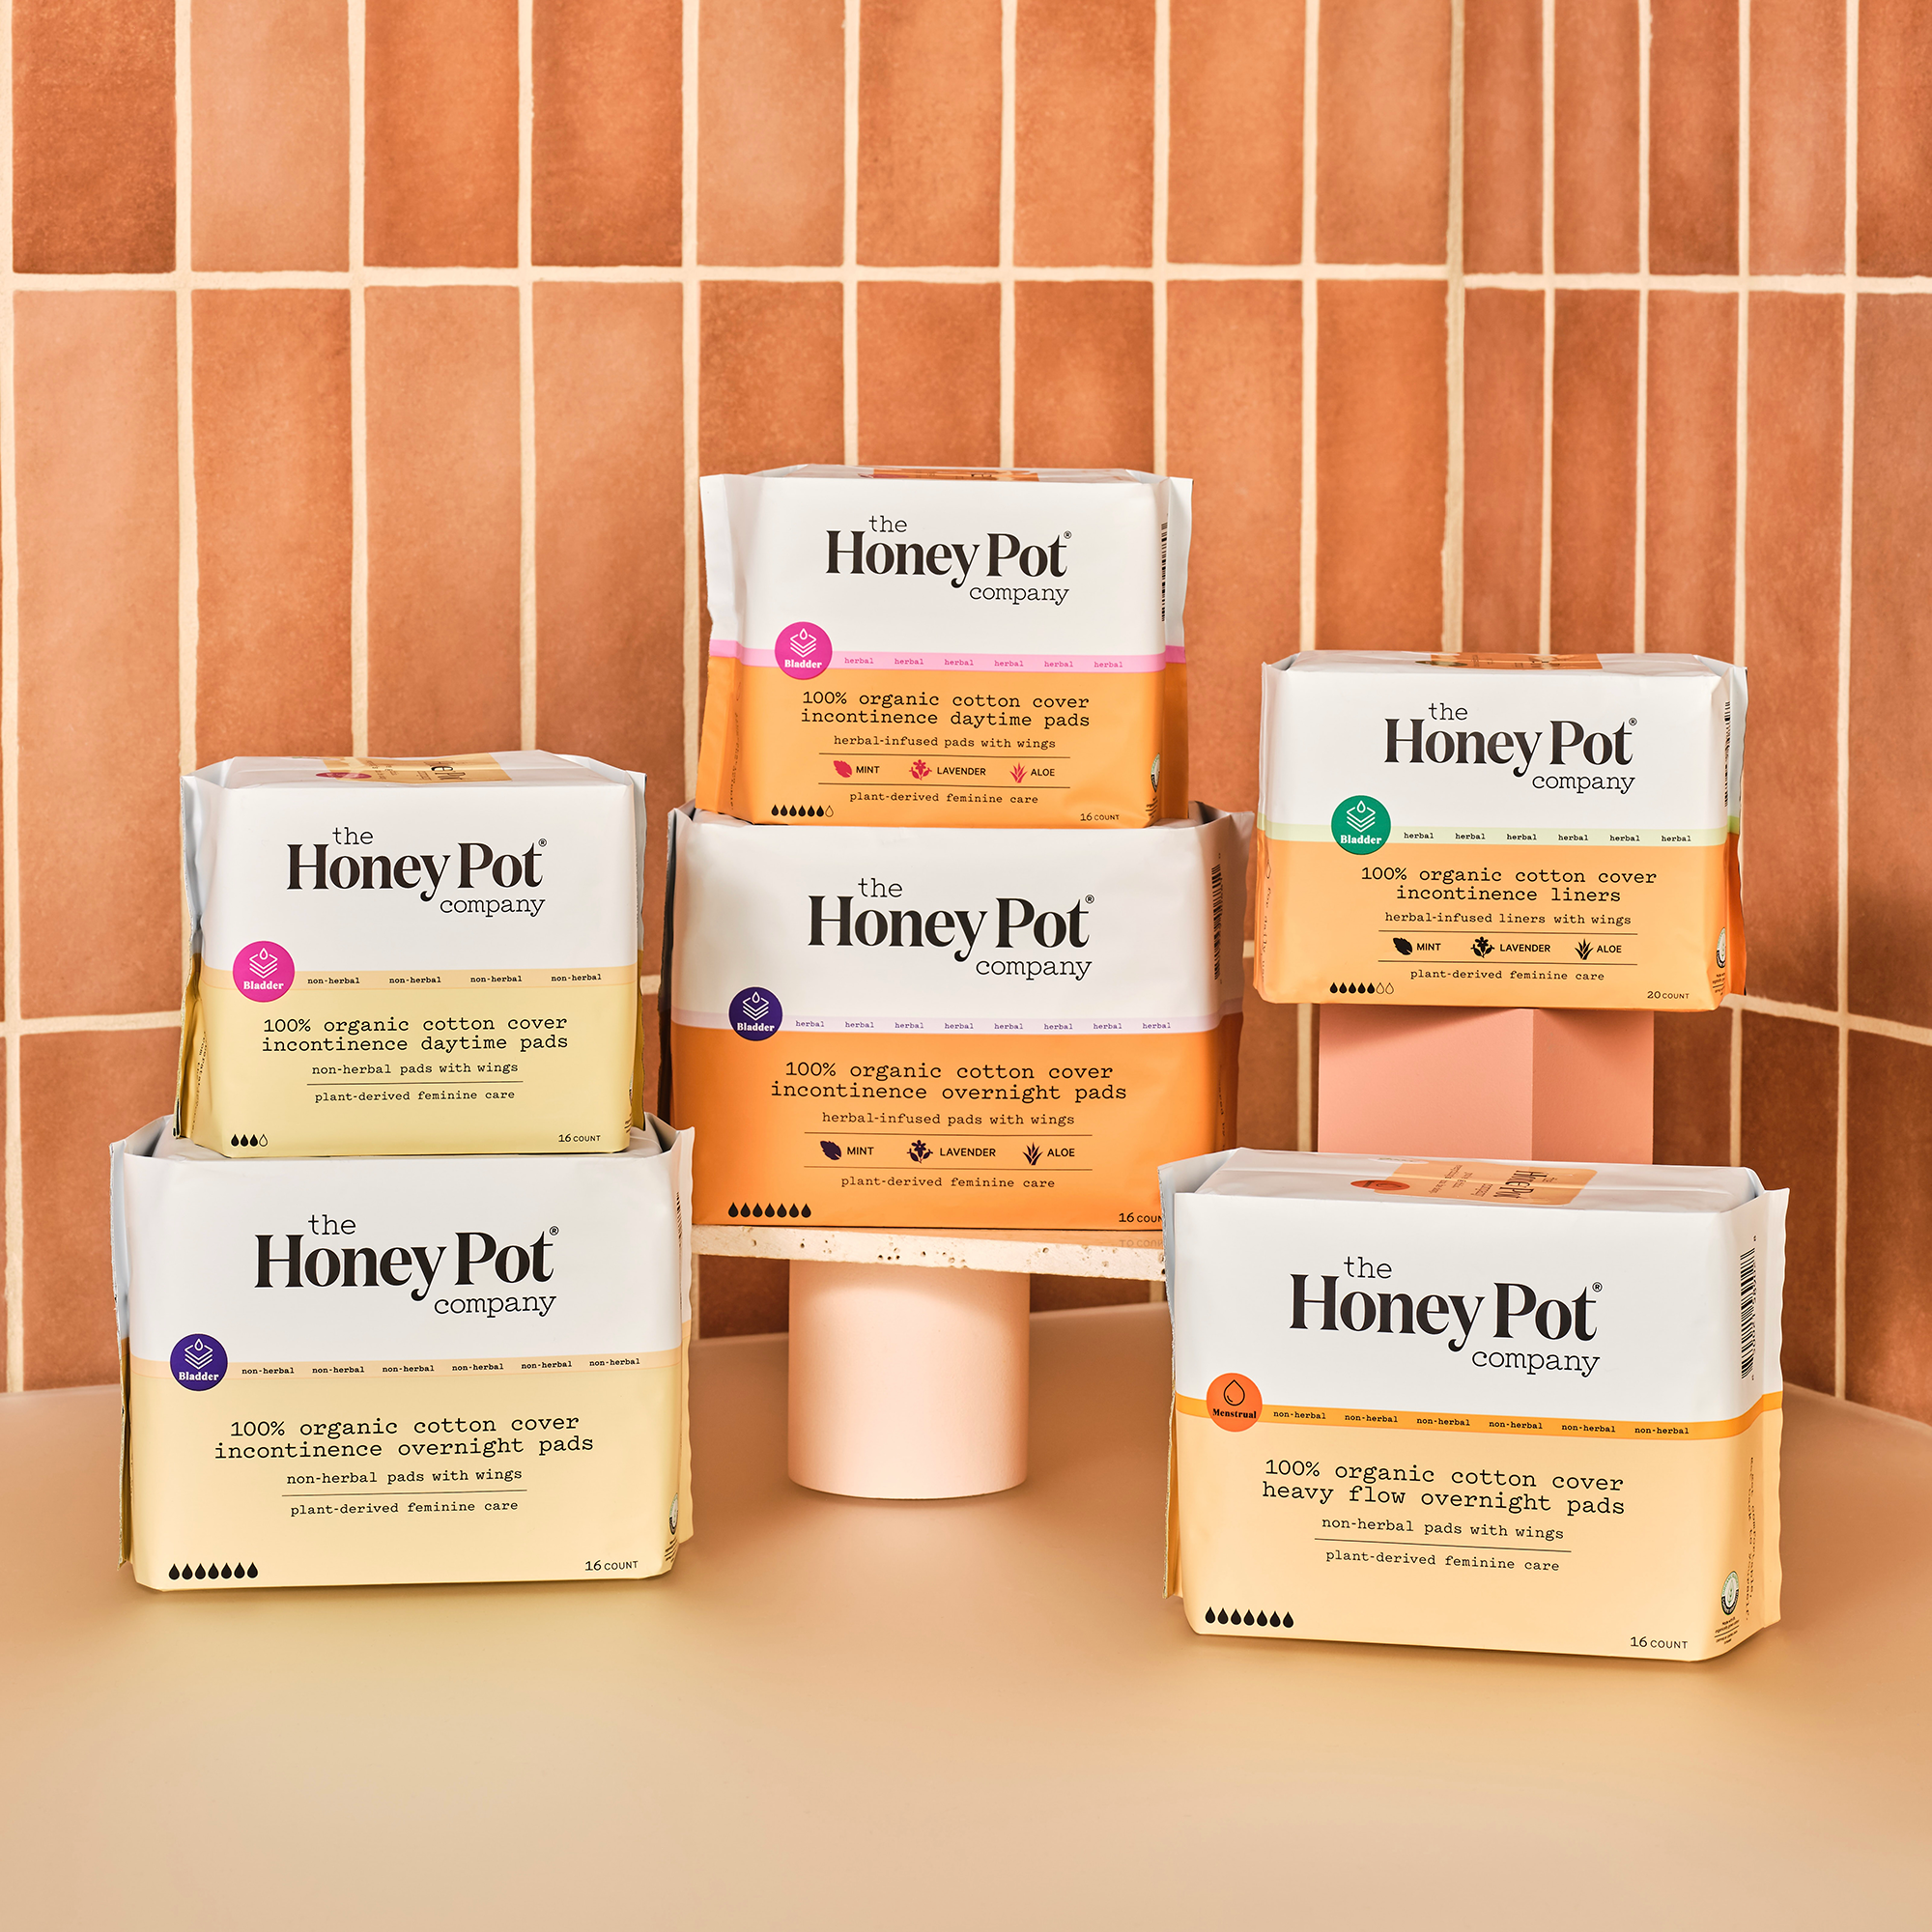 The Honey Pot Pads, Incontinence Overnight, with Wings, Organic, Non-Herbal Cotton - 16 pads